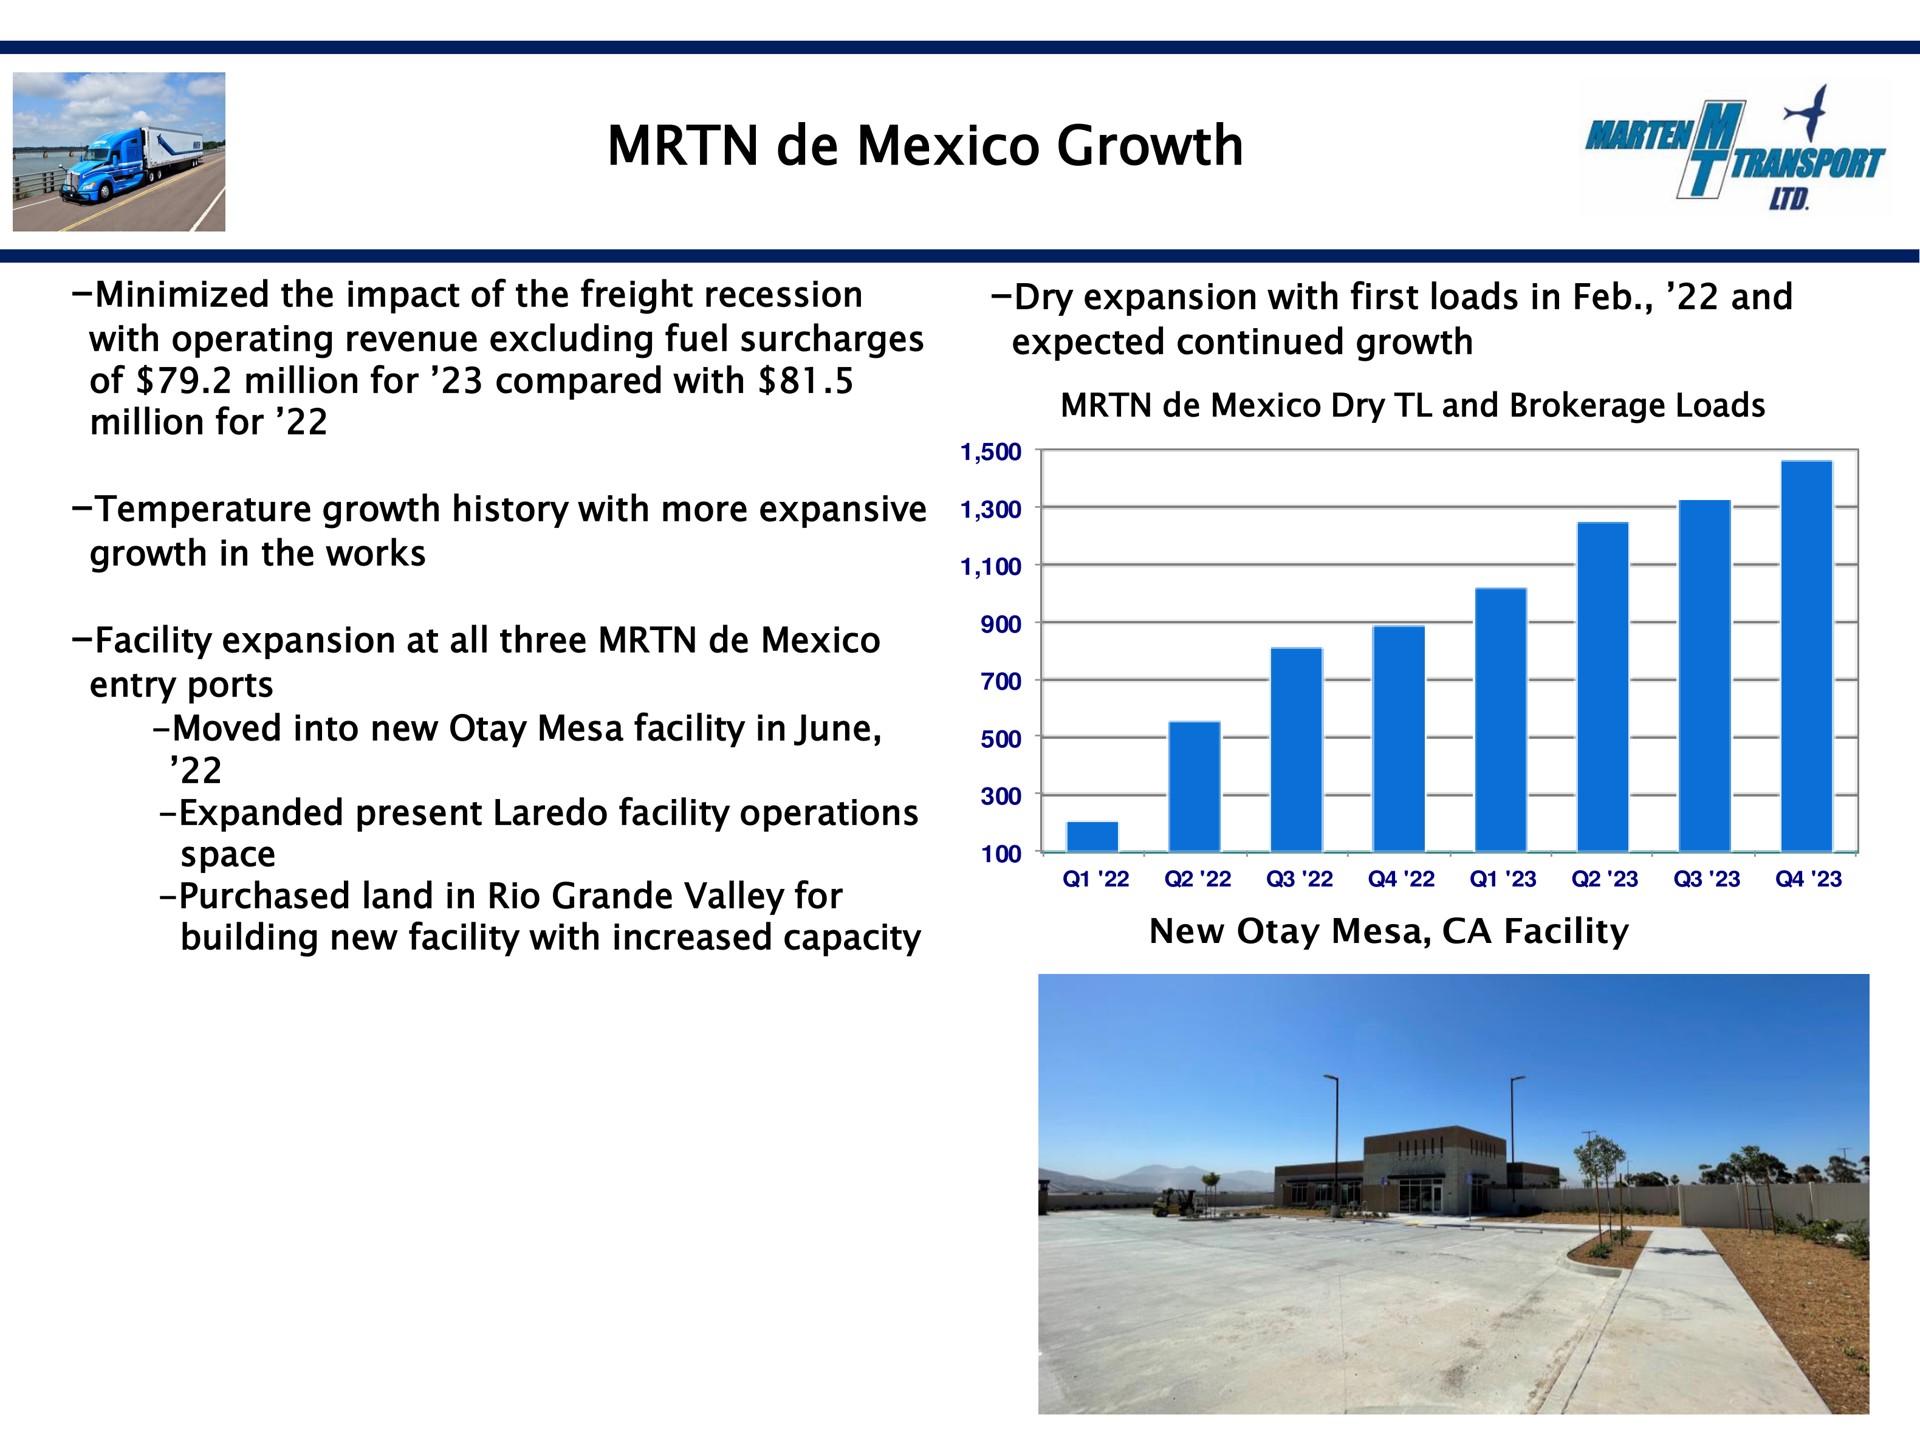 growth minimized the impact of the freight recession with operating revenue excluding fuel surcharges of million for compared with million for dry expansion with first loads in and expected continued growth temperature growth history with more expansive growth in the works facility expansion at all three entry ports moved into new mesa facility in june expanded present facility operations space purchased land in rio valley for building new facility with increased capacity new mesa facility marten | Marten Transport